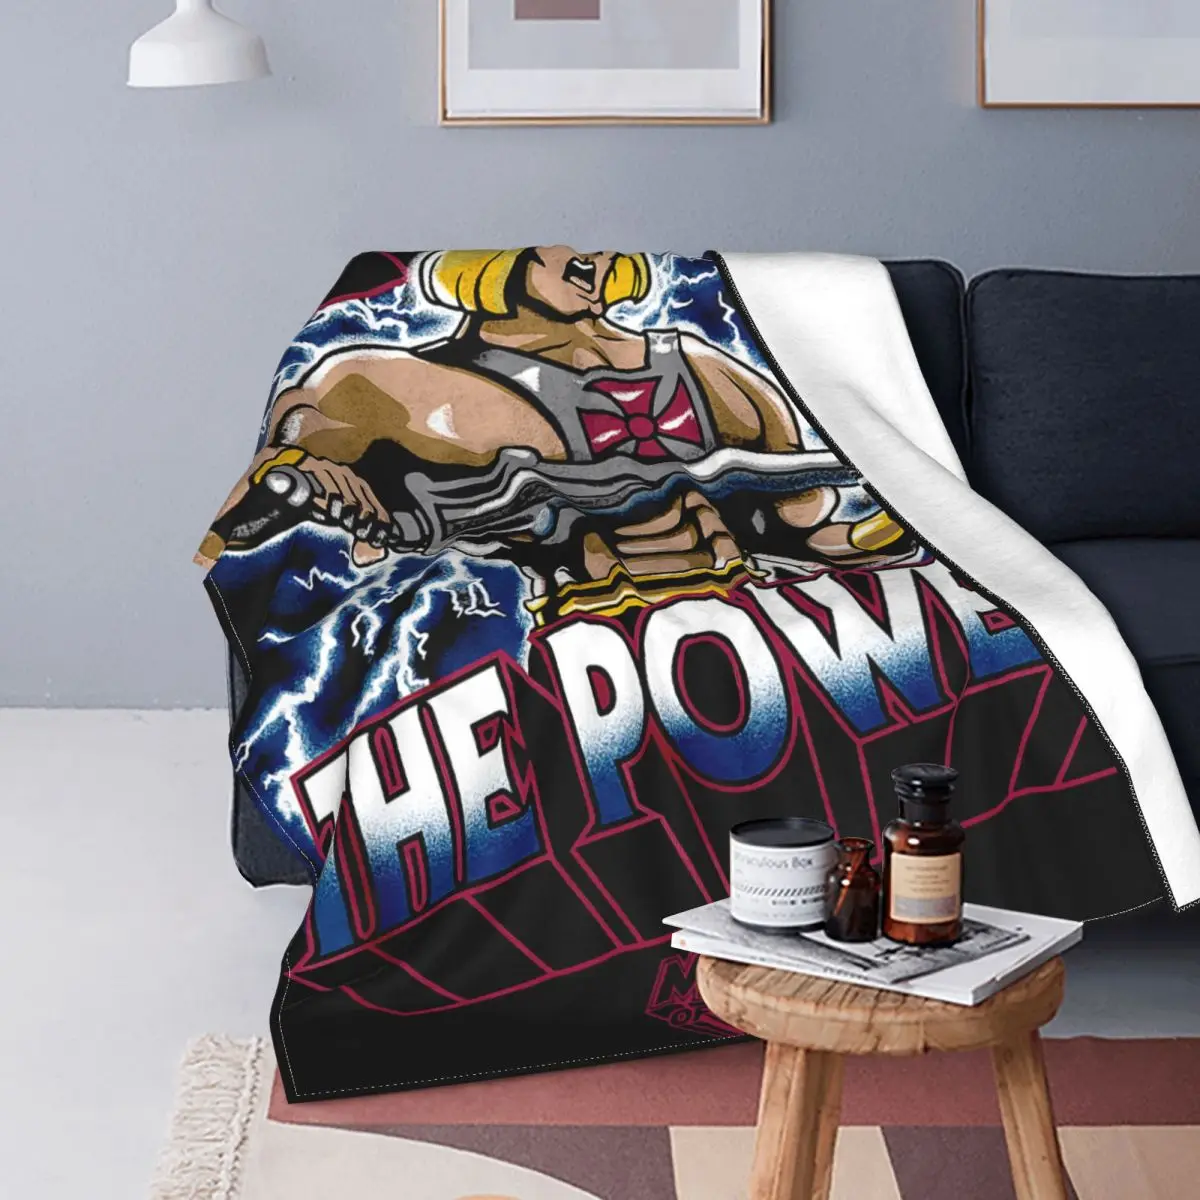 

He-Man Masters Of The Universe Blanket Soft Fleece Warm Flannel Skeletor 80s She-Ra Beast Throw Blankets for Sofa Travel